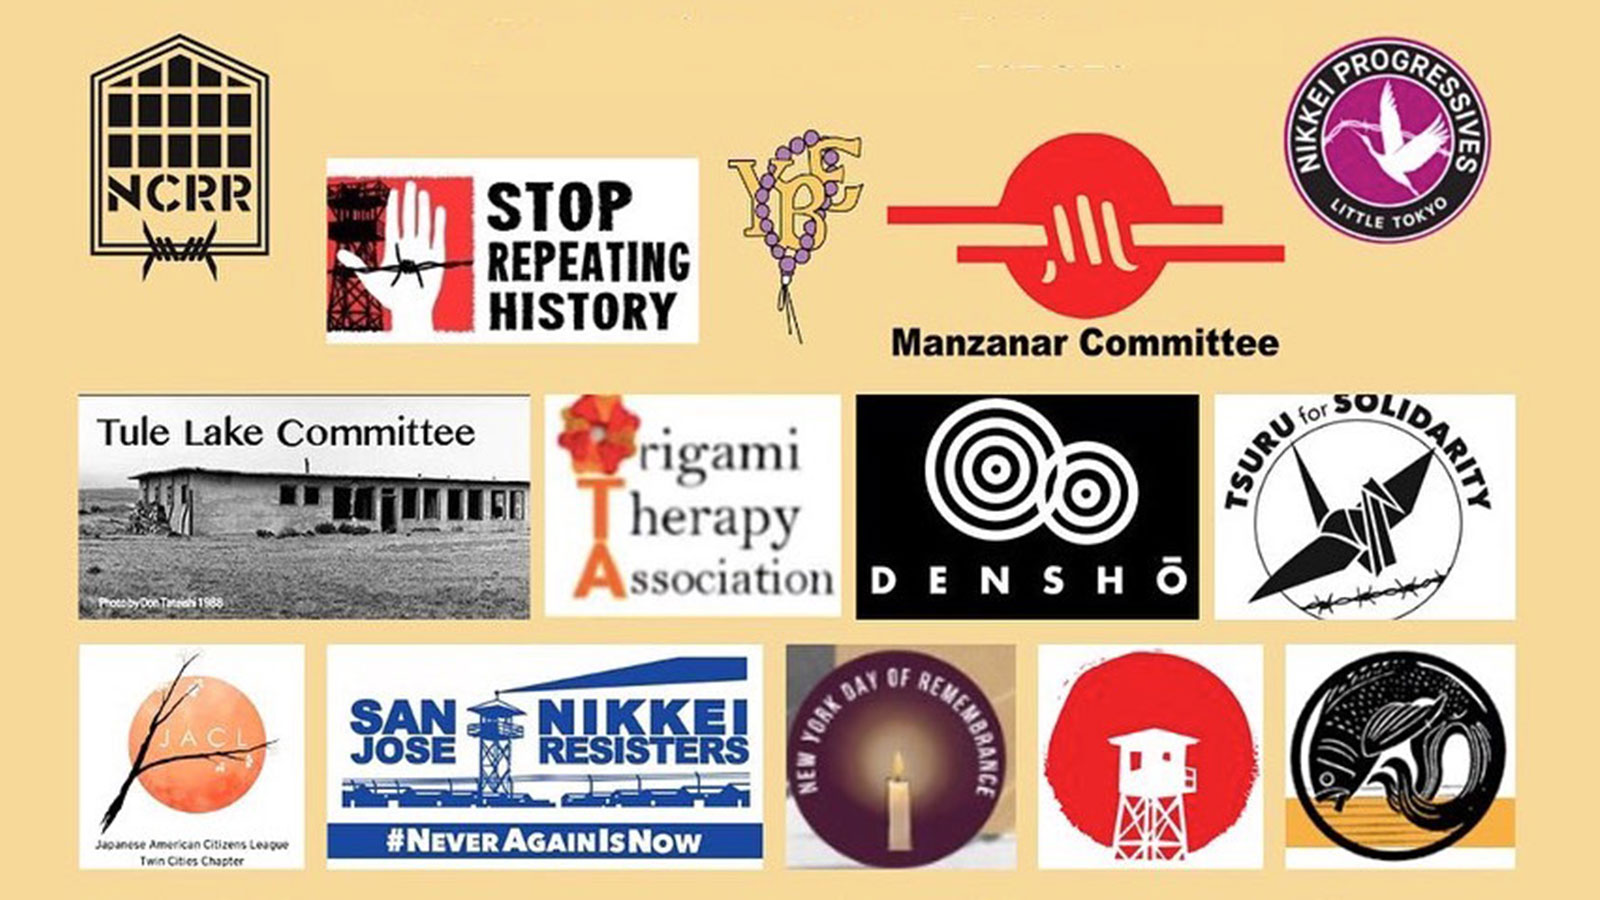 76 JA, Asian American organizations call for presidential commission on Black reparations